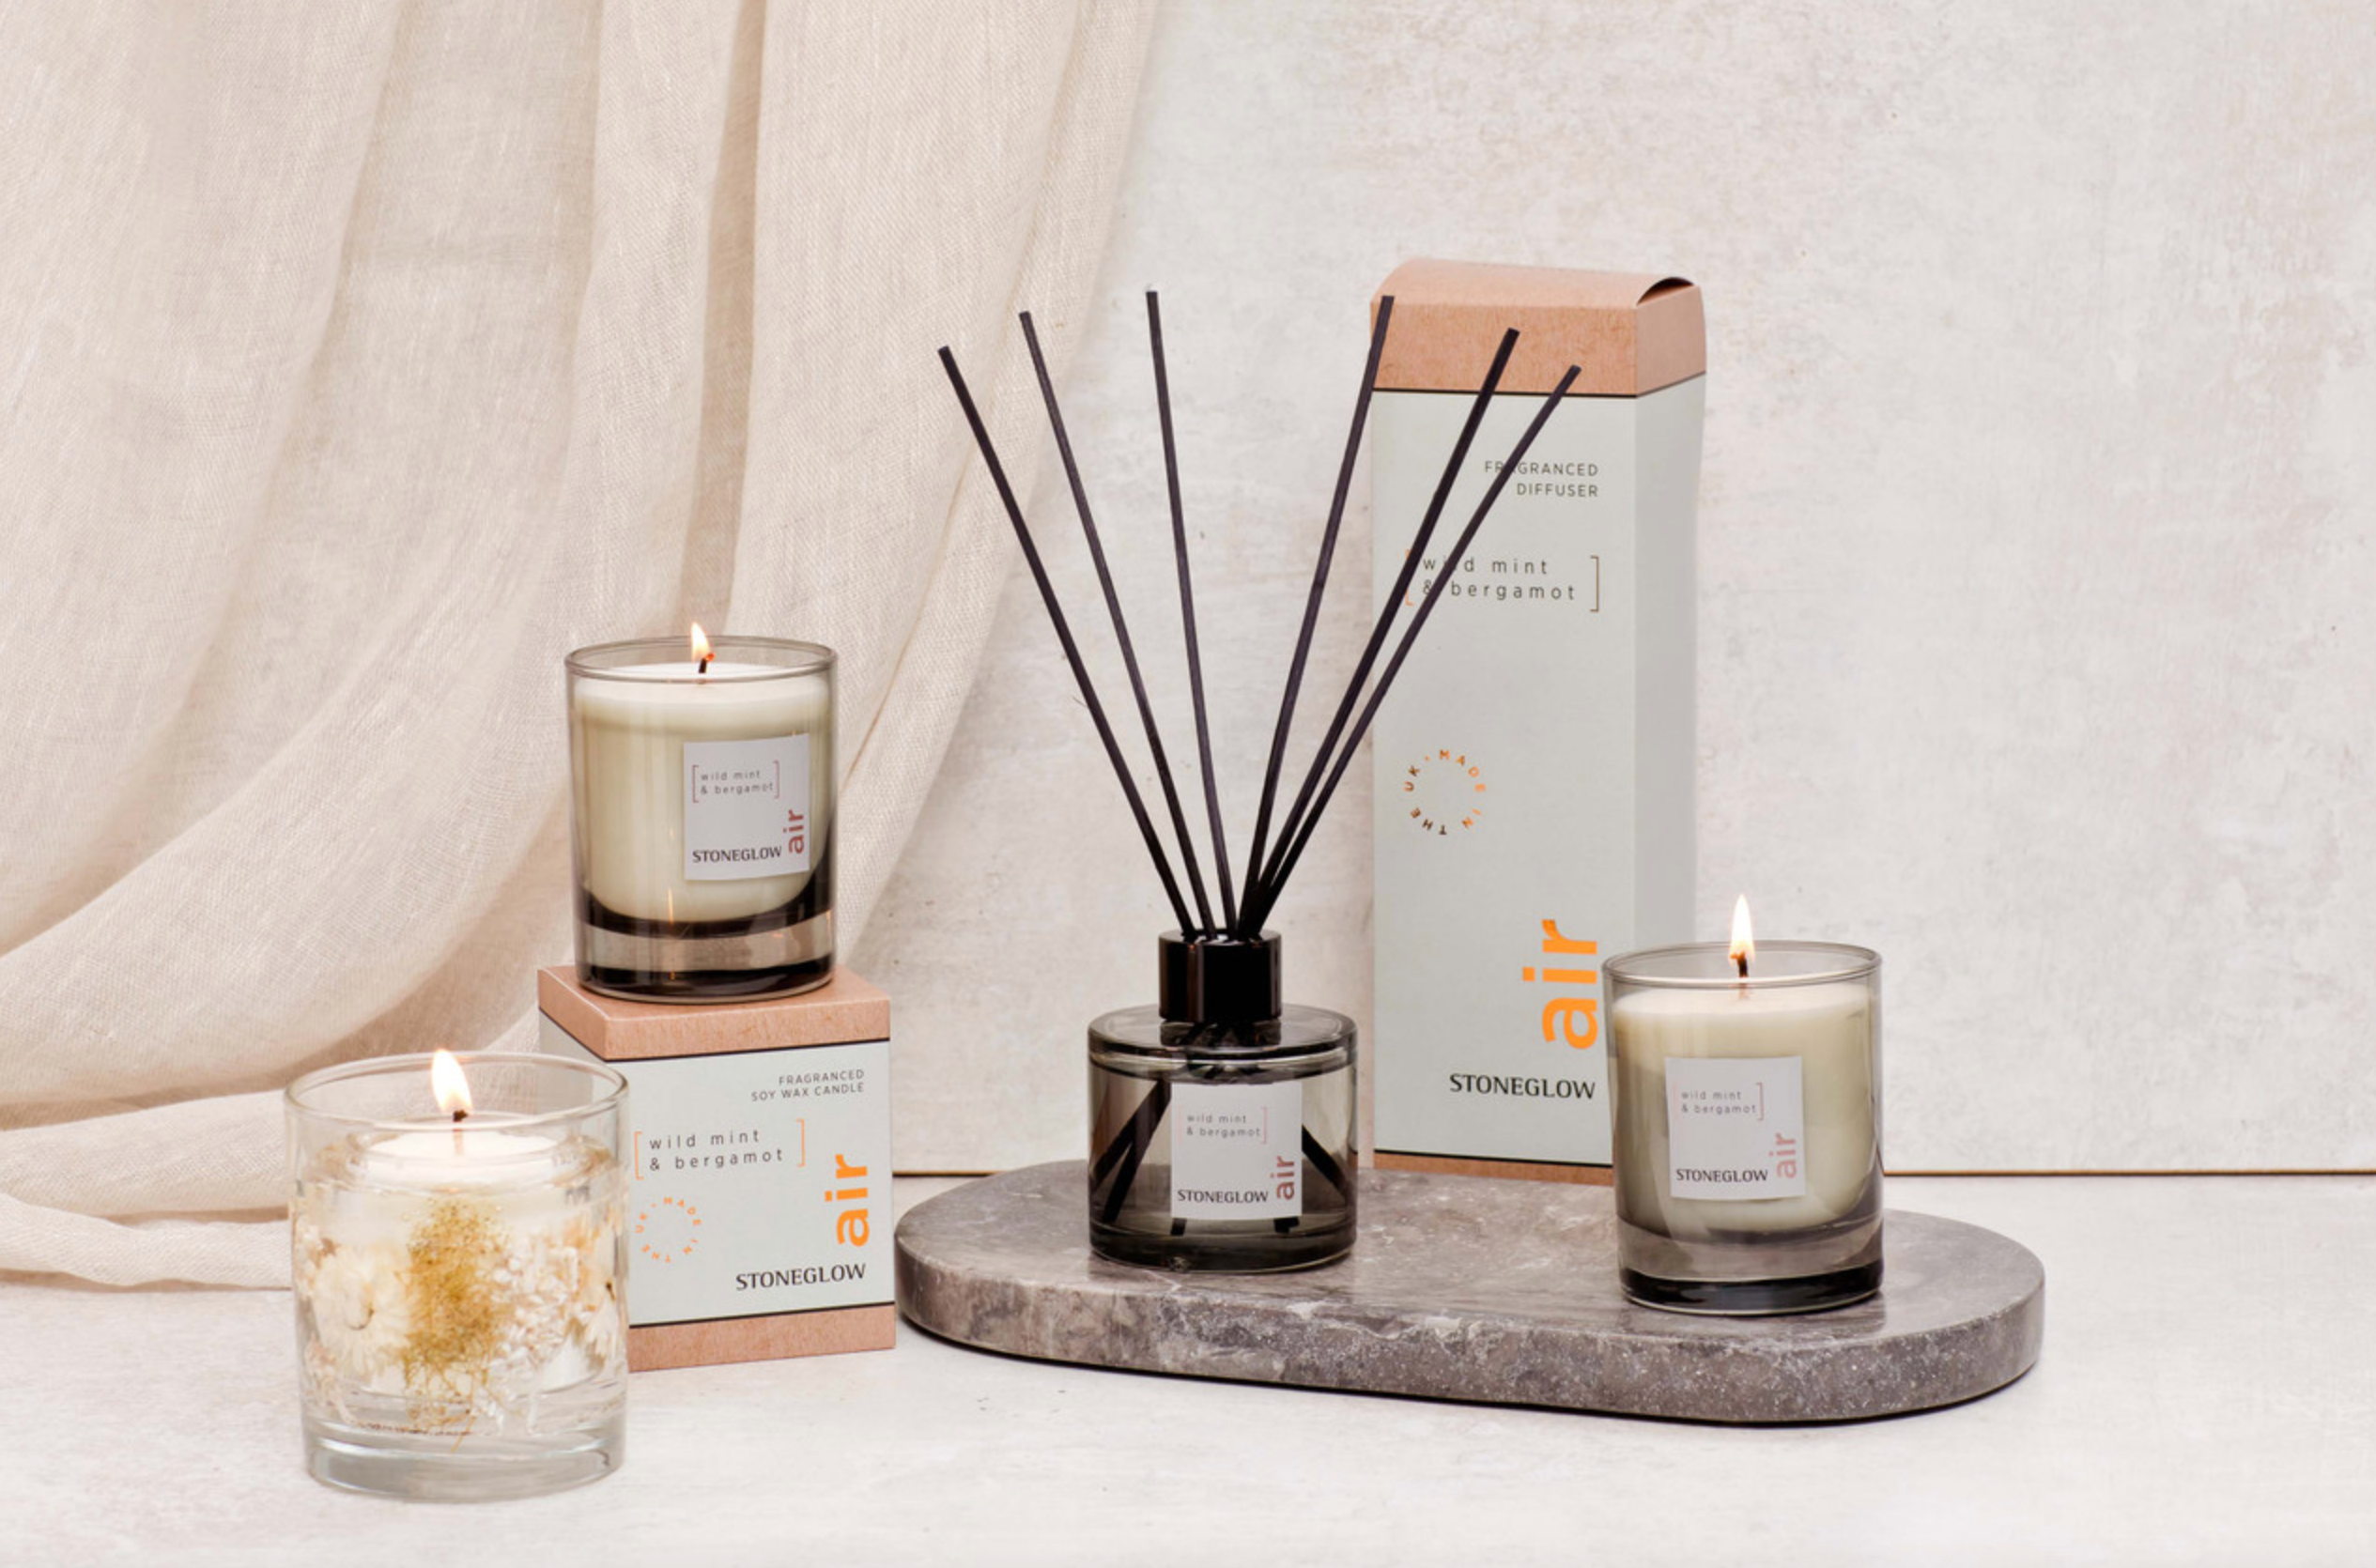 Elements Air: Wild mint and bergamot scented candle